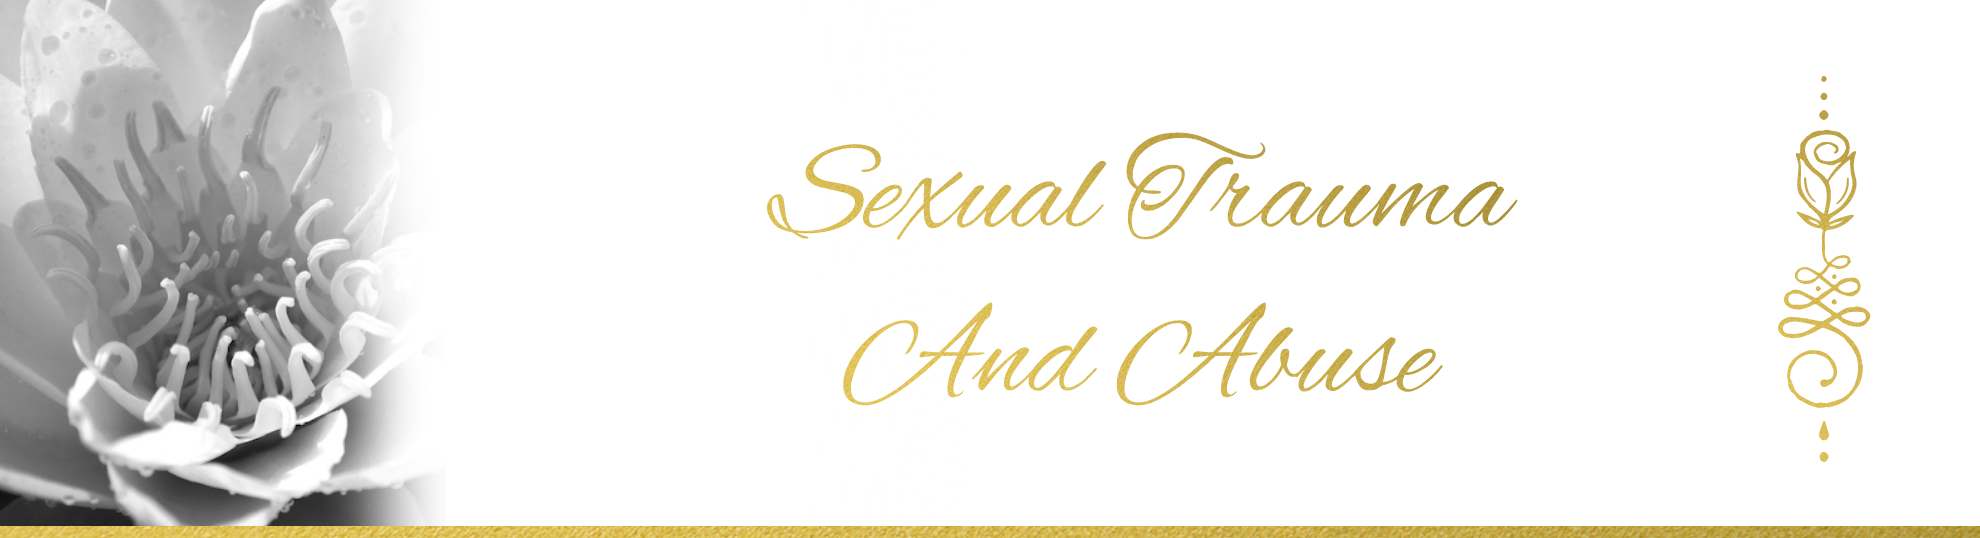 Sexual TraumaAnd abuse Banner